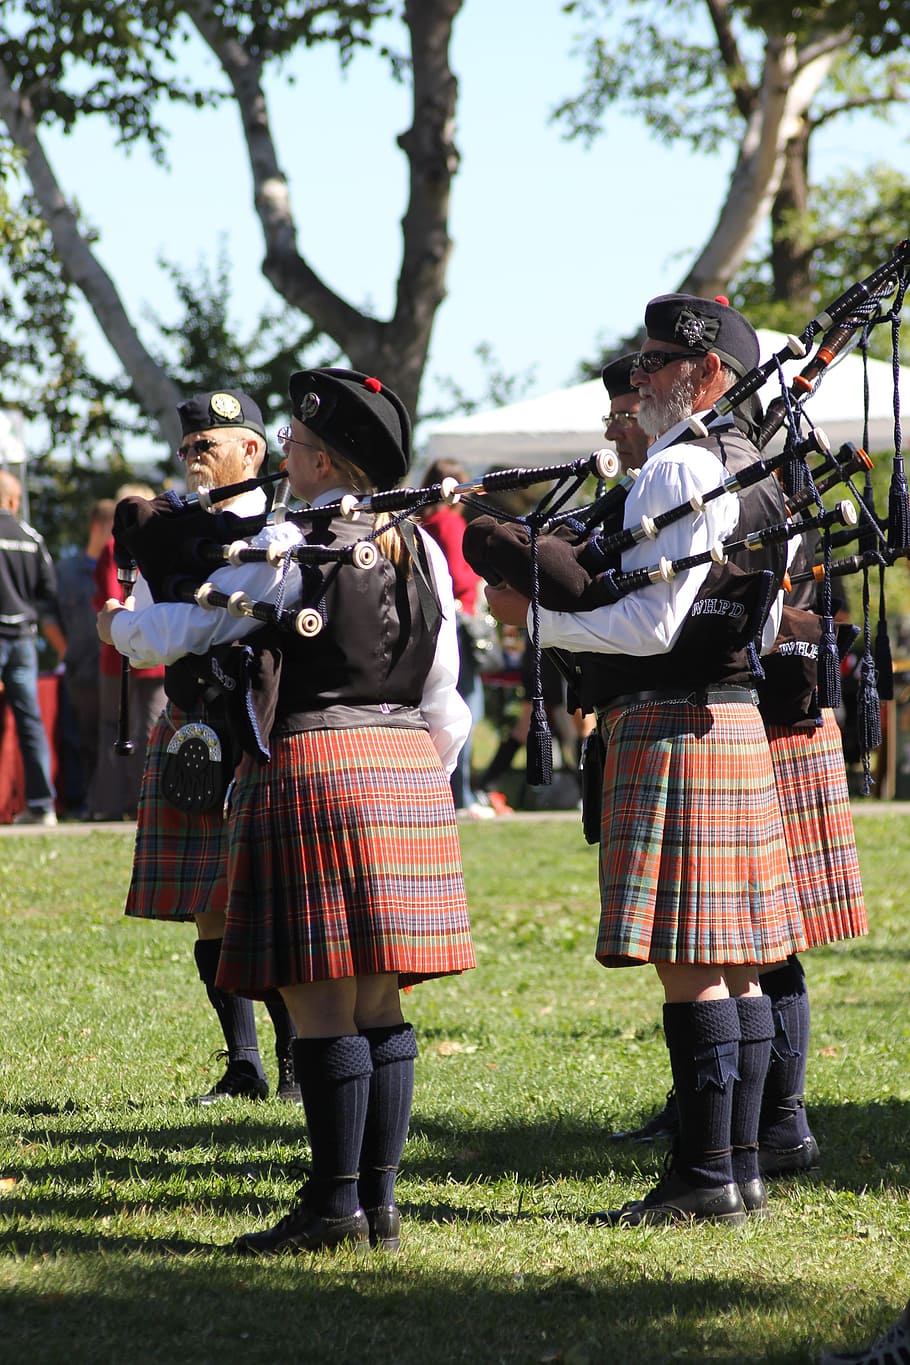 Bagpipes, Scottish, Scot, Kilt, Scotland, bagpipers, music, entertainment, cultures, tradition